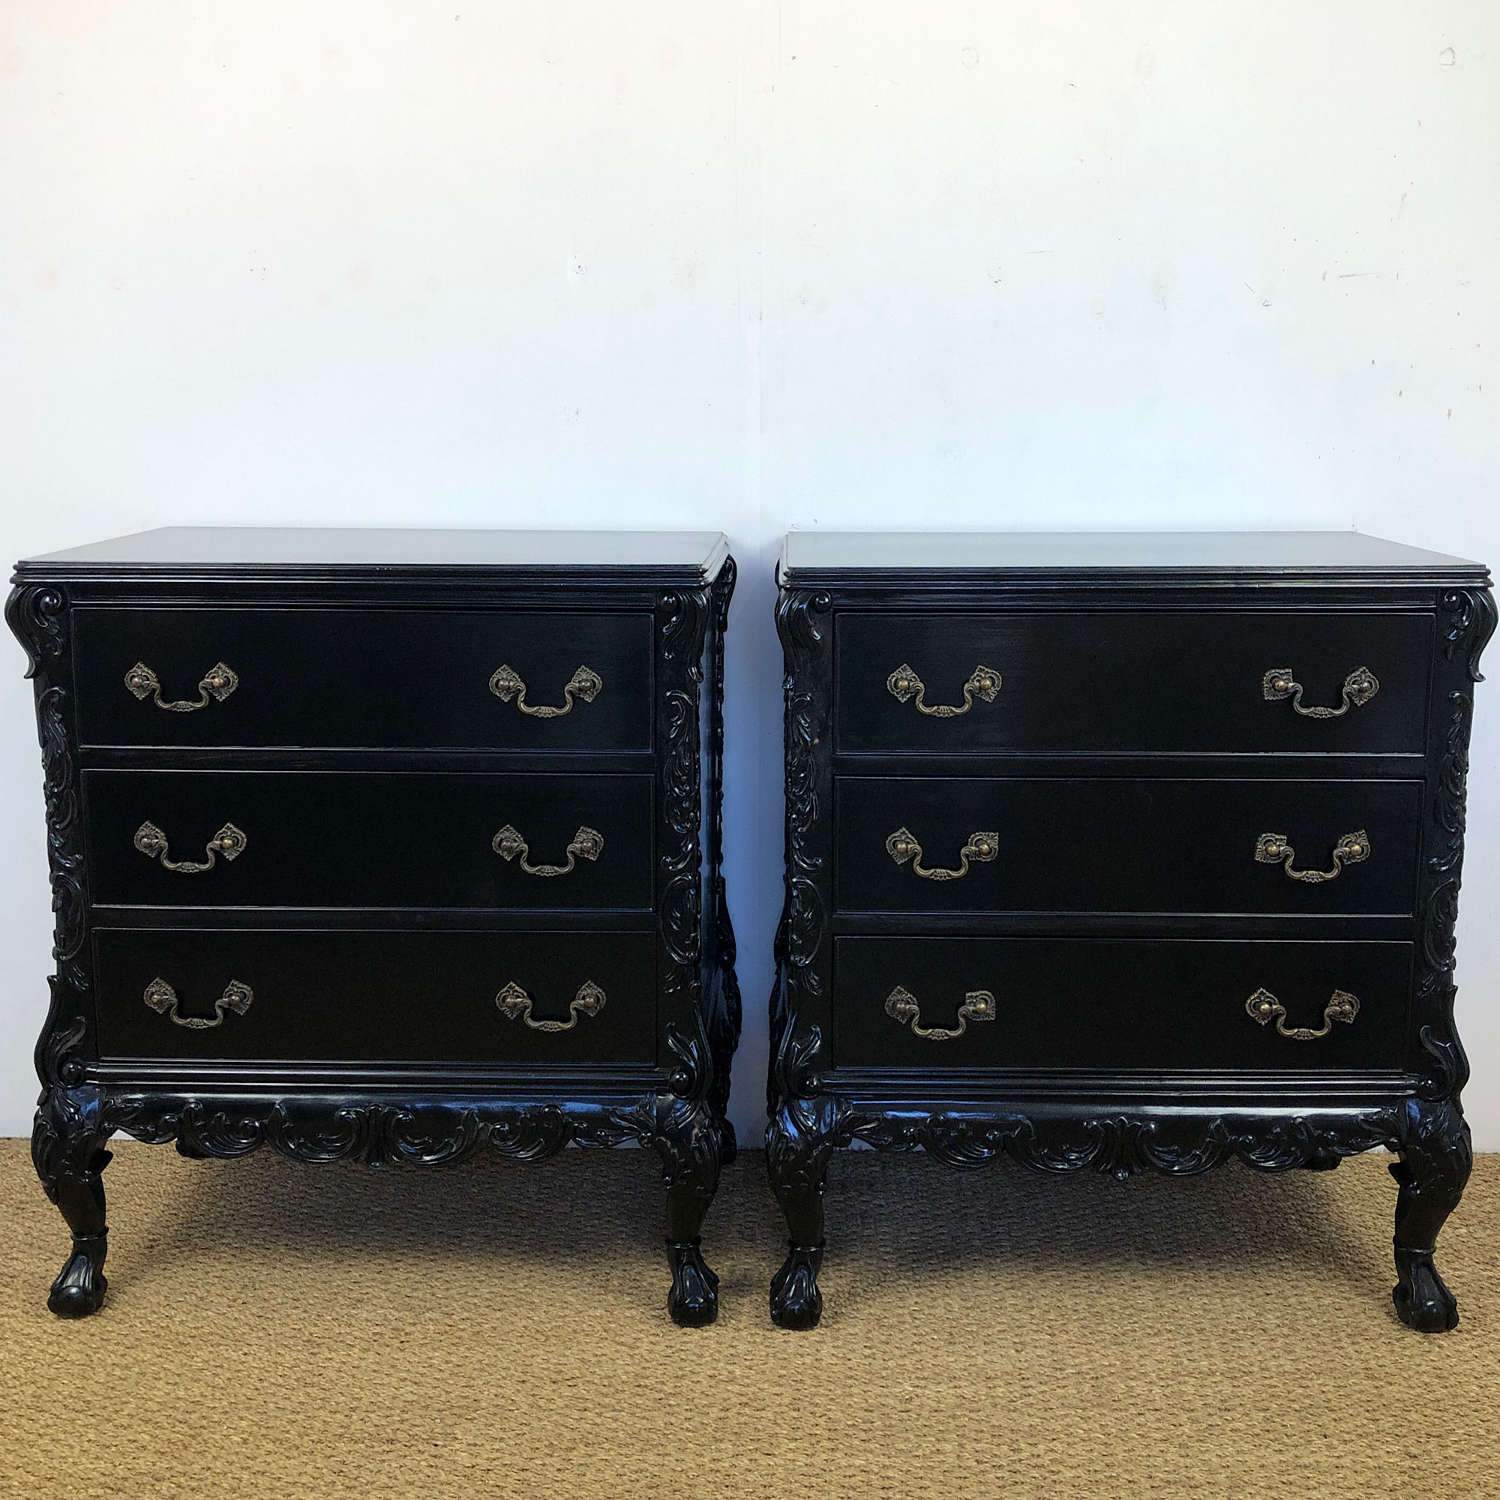 A pair of Black Lacquer Rocco Commodes